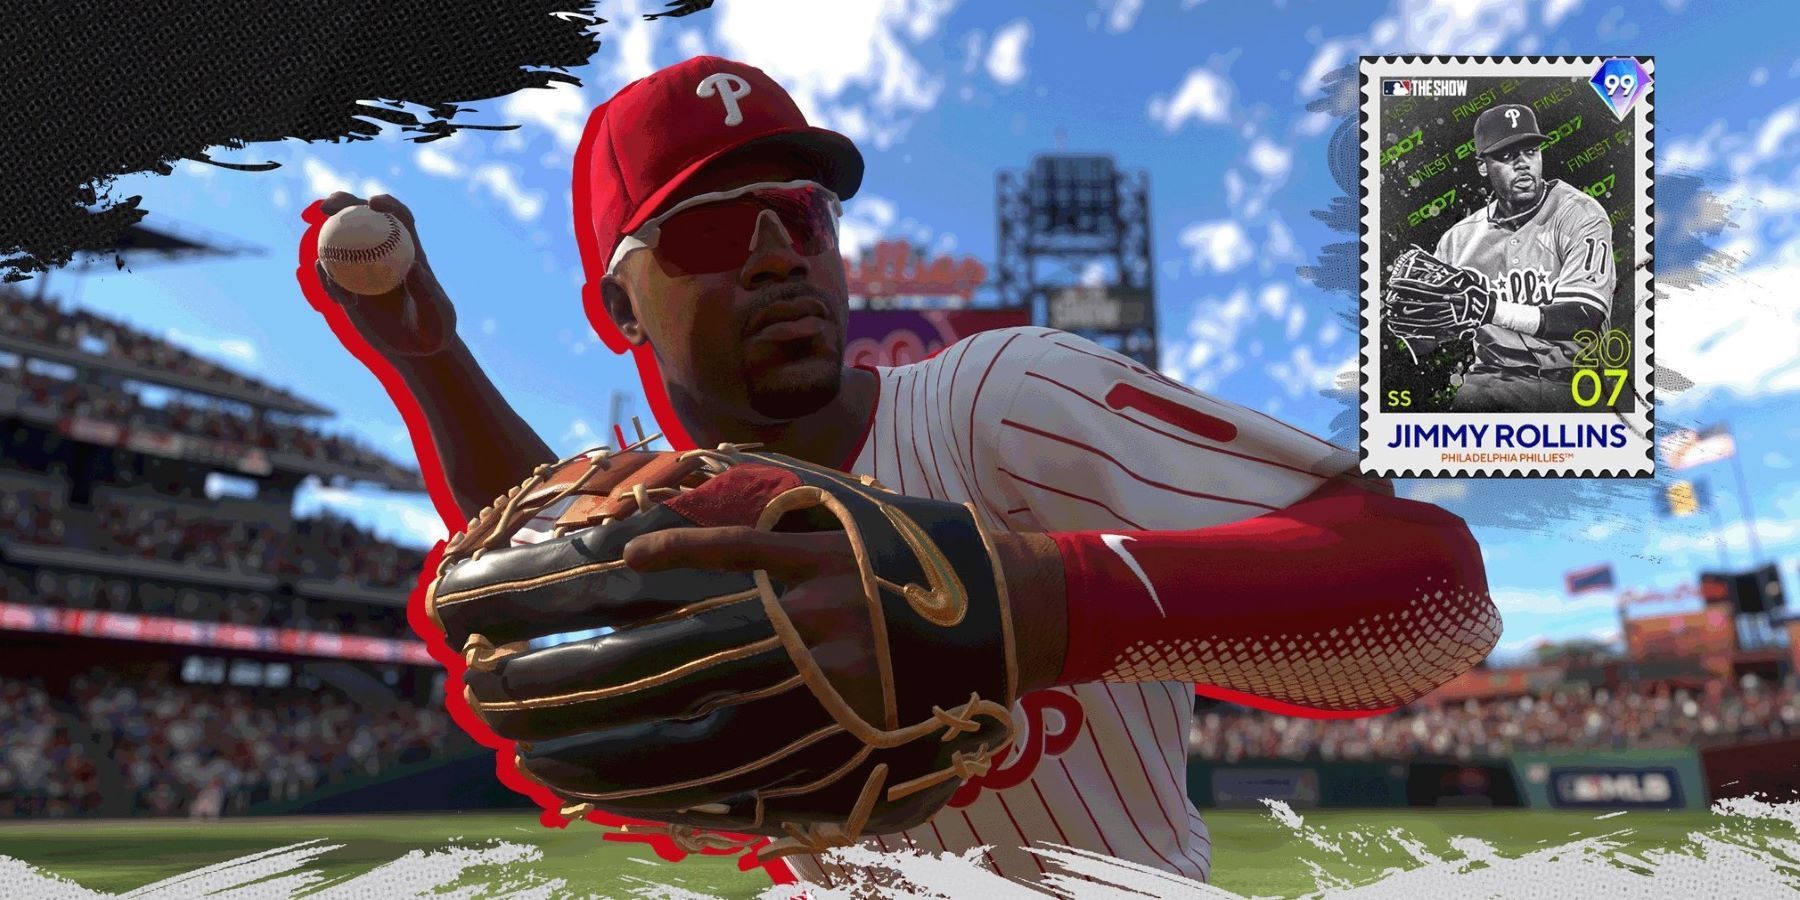 MLB The Show 22's Jimmy Rollins promo art